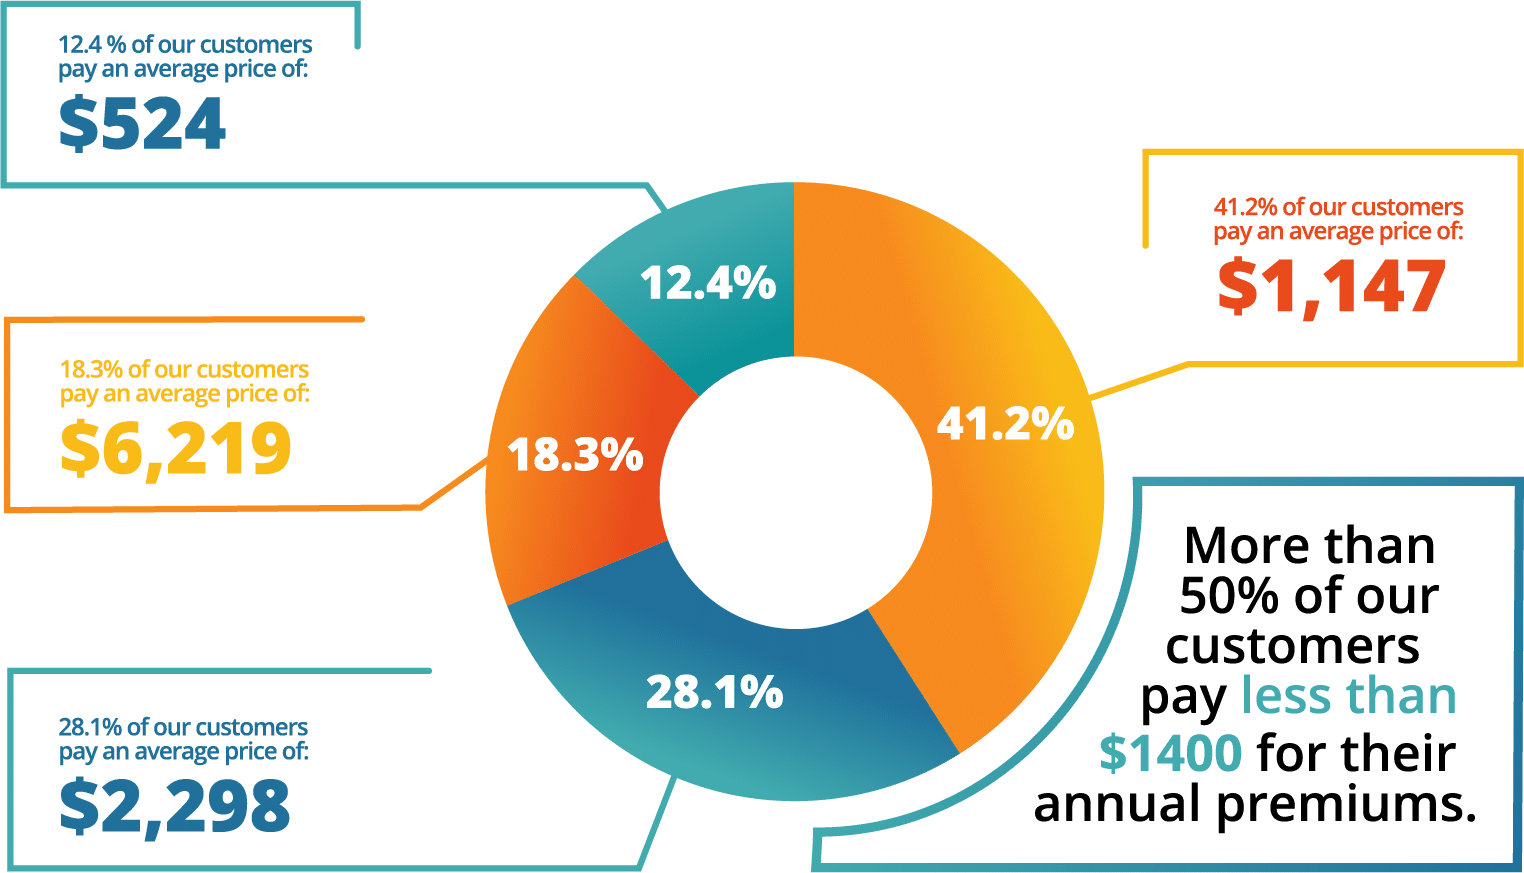 Pricing at a Glance: 41.2% of Insurance canopy customers pay an average annual price of $1,1147. 28.1% pay an average of $2,298. 18.3% pay an average of $6,219. 12.4% pay an average of $524. More than 50% of Insurance Canopy customers pay less than $1400 for their premium for manufacturers insurance.